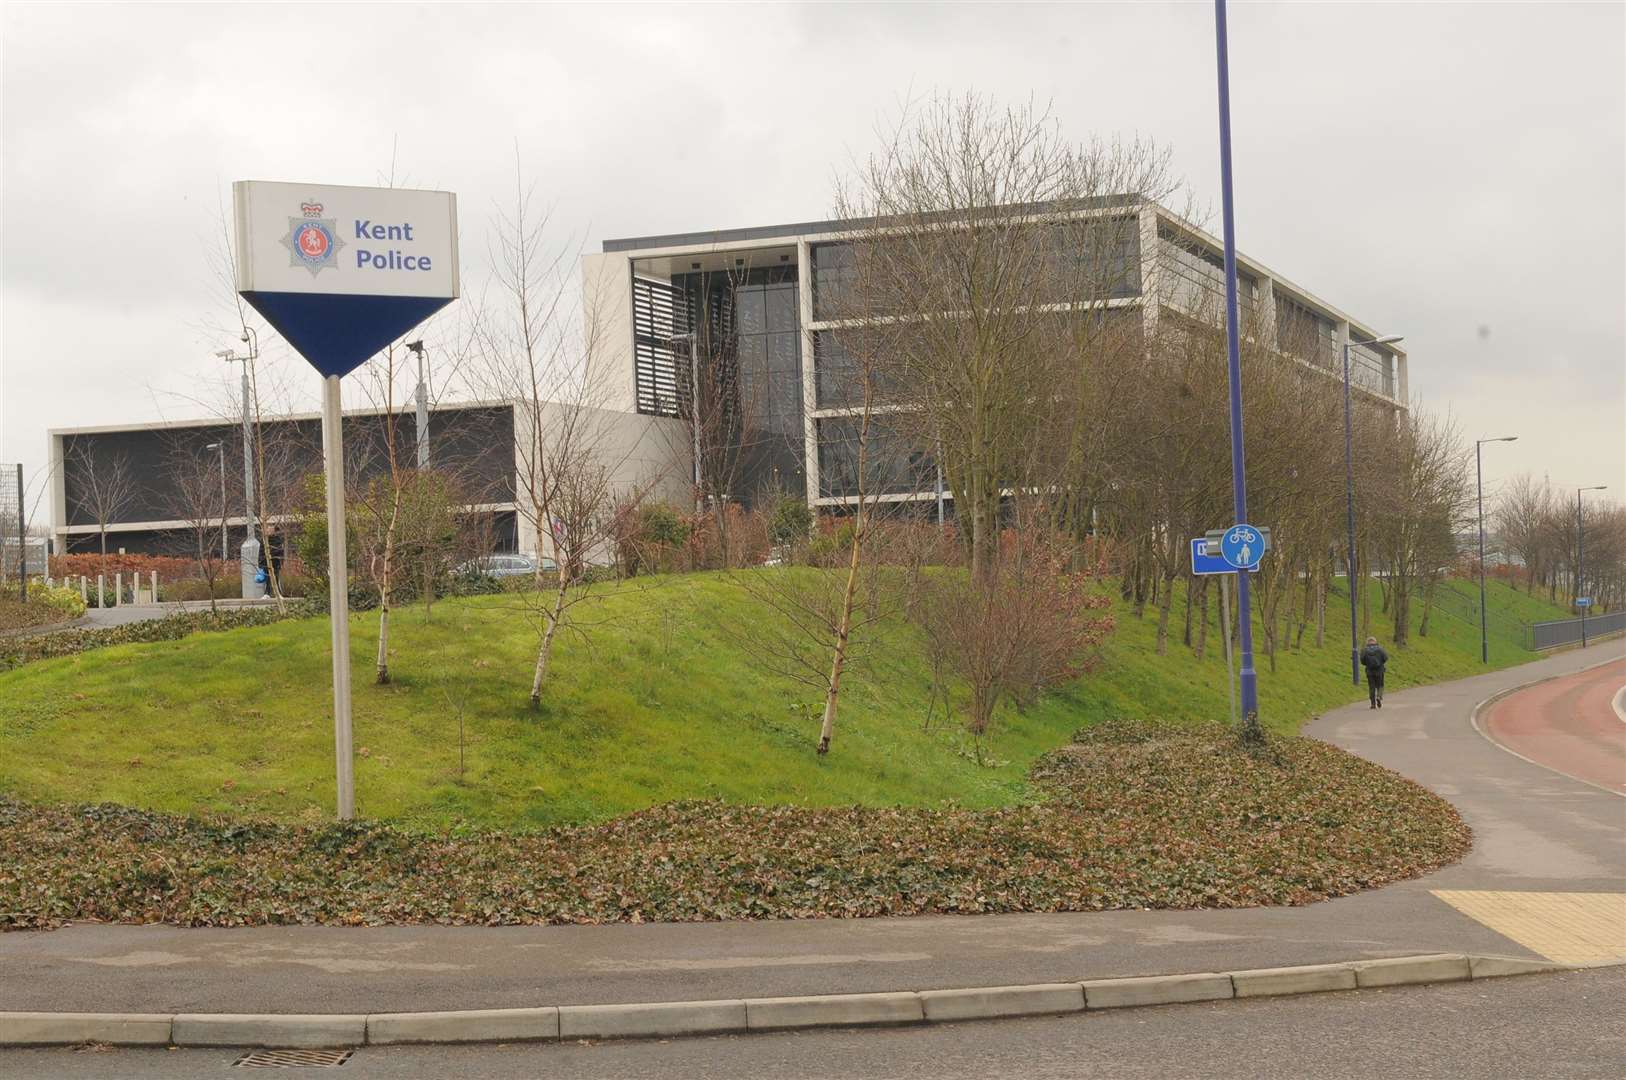 The hearing took place virtually with the chief constable presiding from Kent Police Headquarters in Northfleet